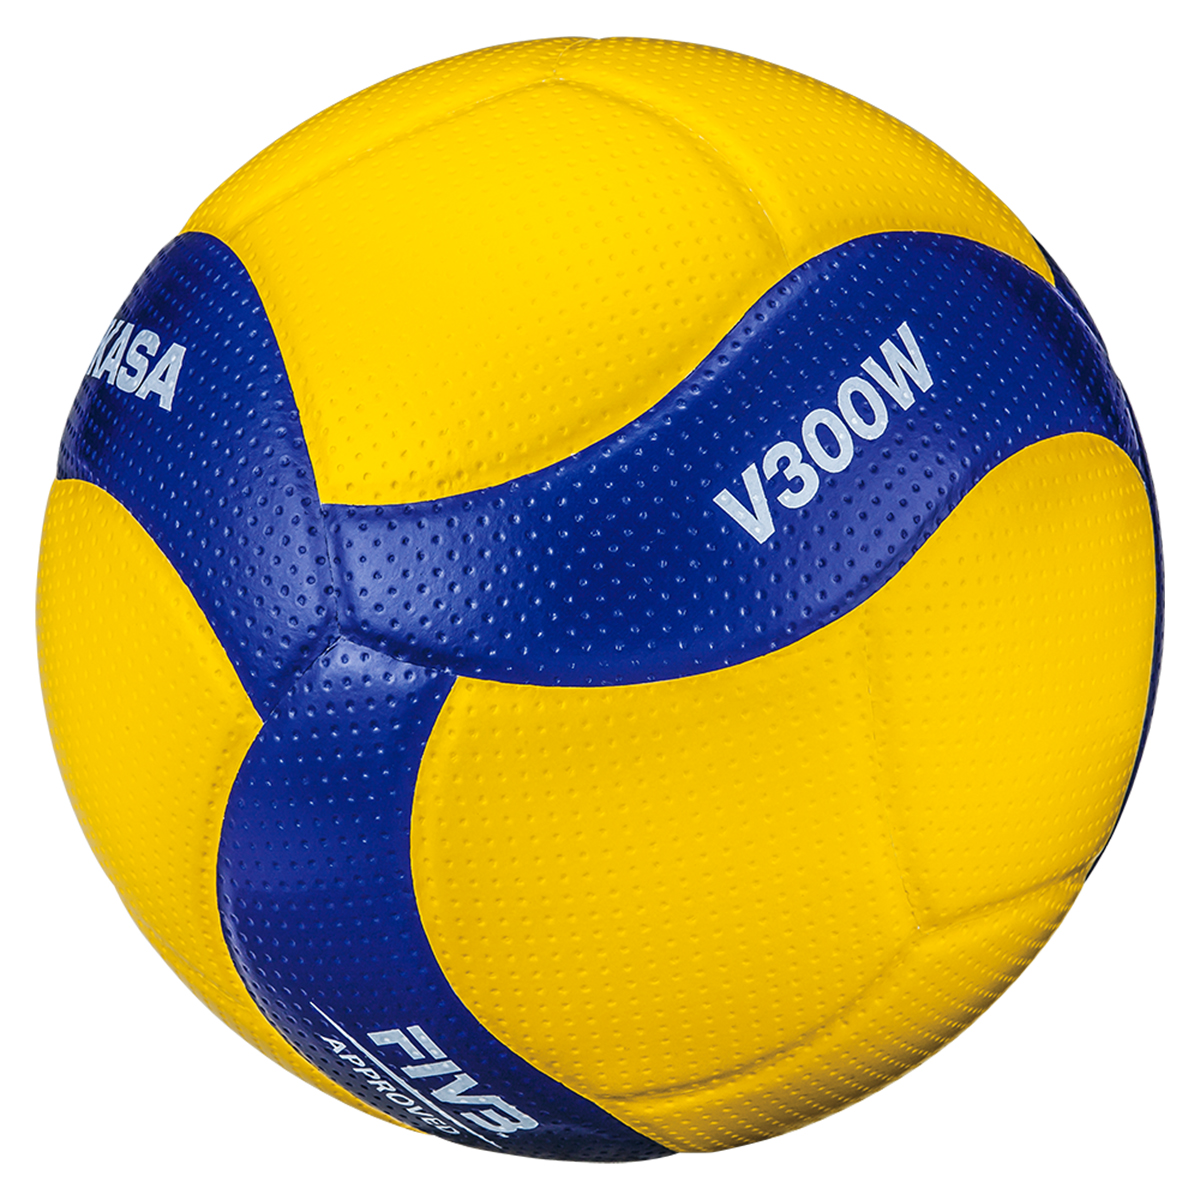 MIKASA V300W VW SERIES VOLLEYBALL SINGLE DIMPLED 18 PANEL SIZE 5